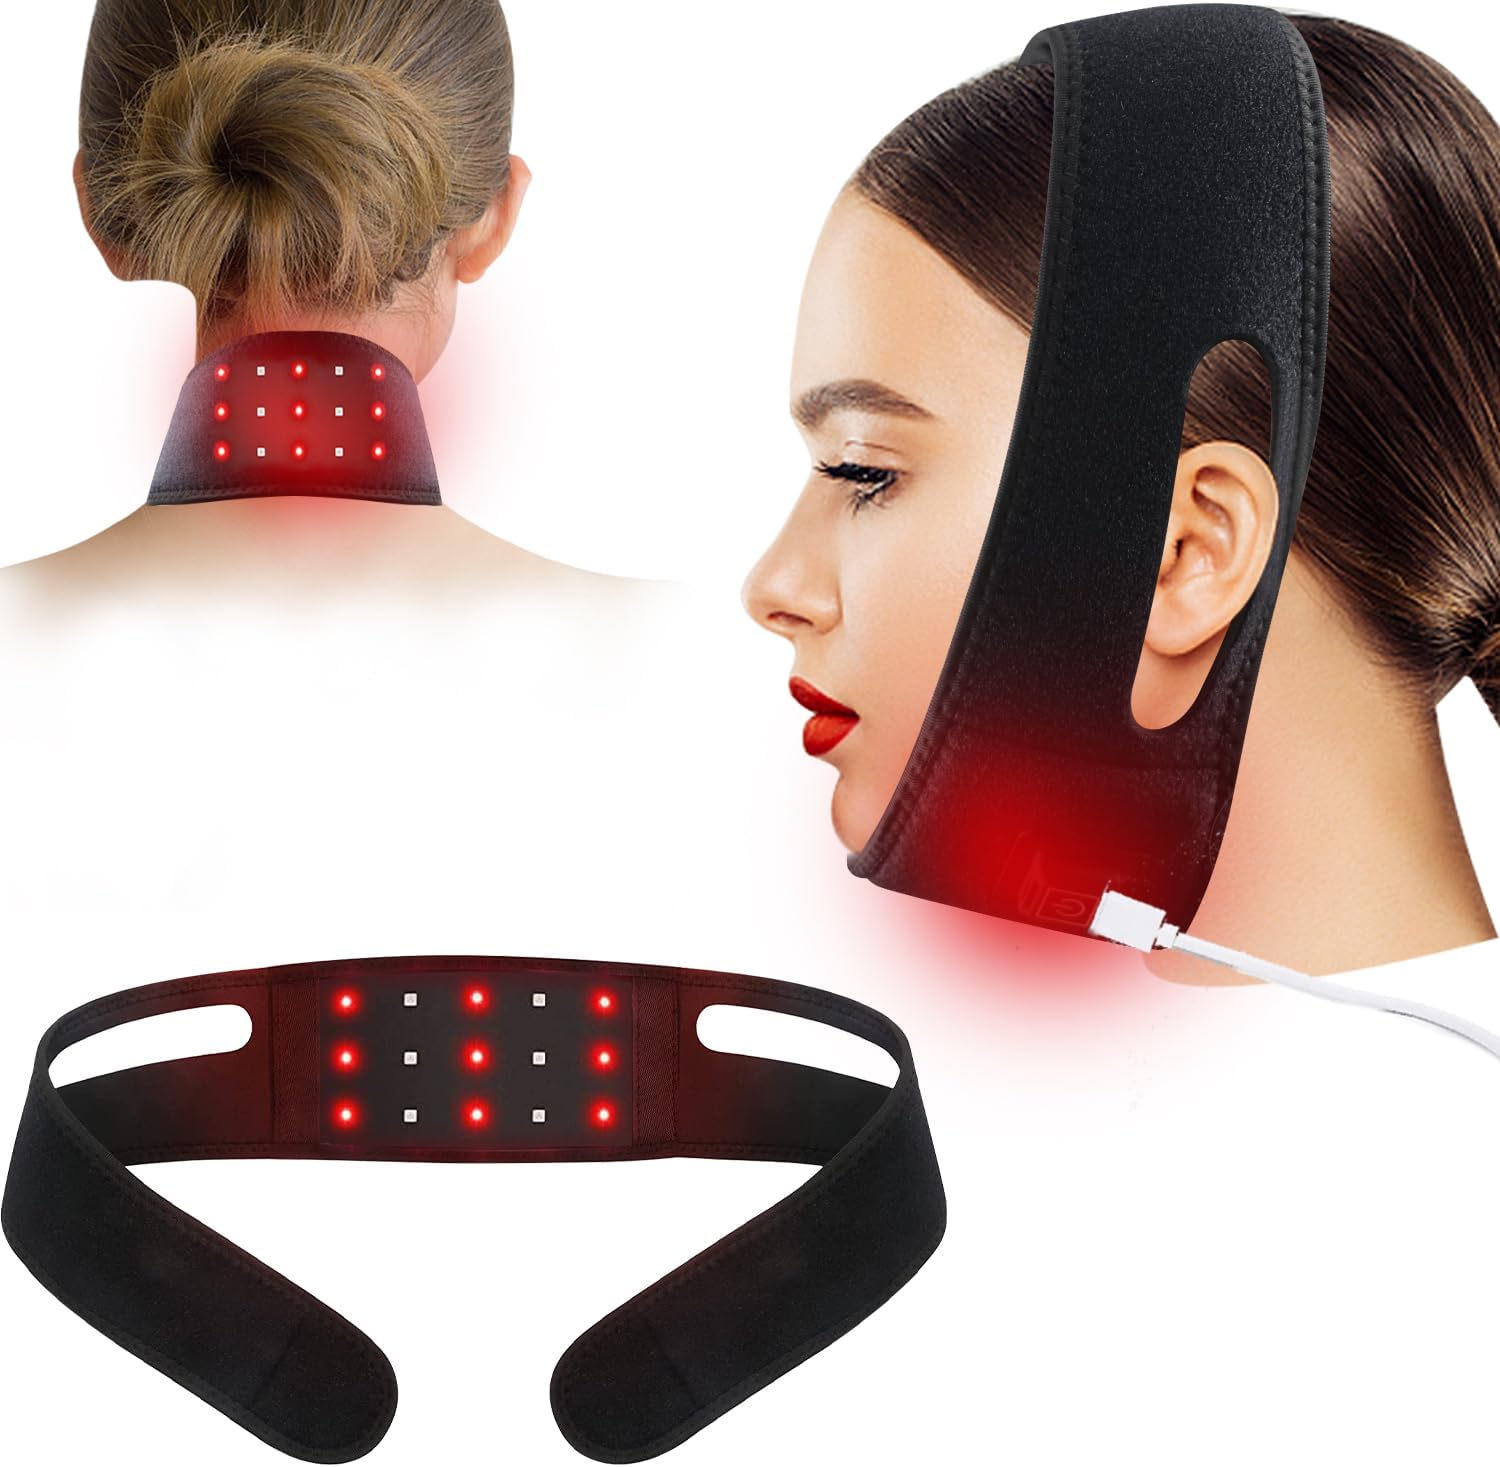 Red Light Therapy Belt for Neck Review